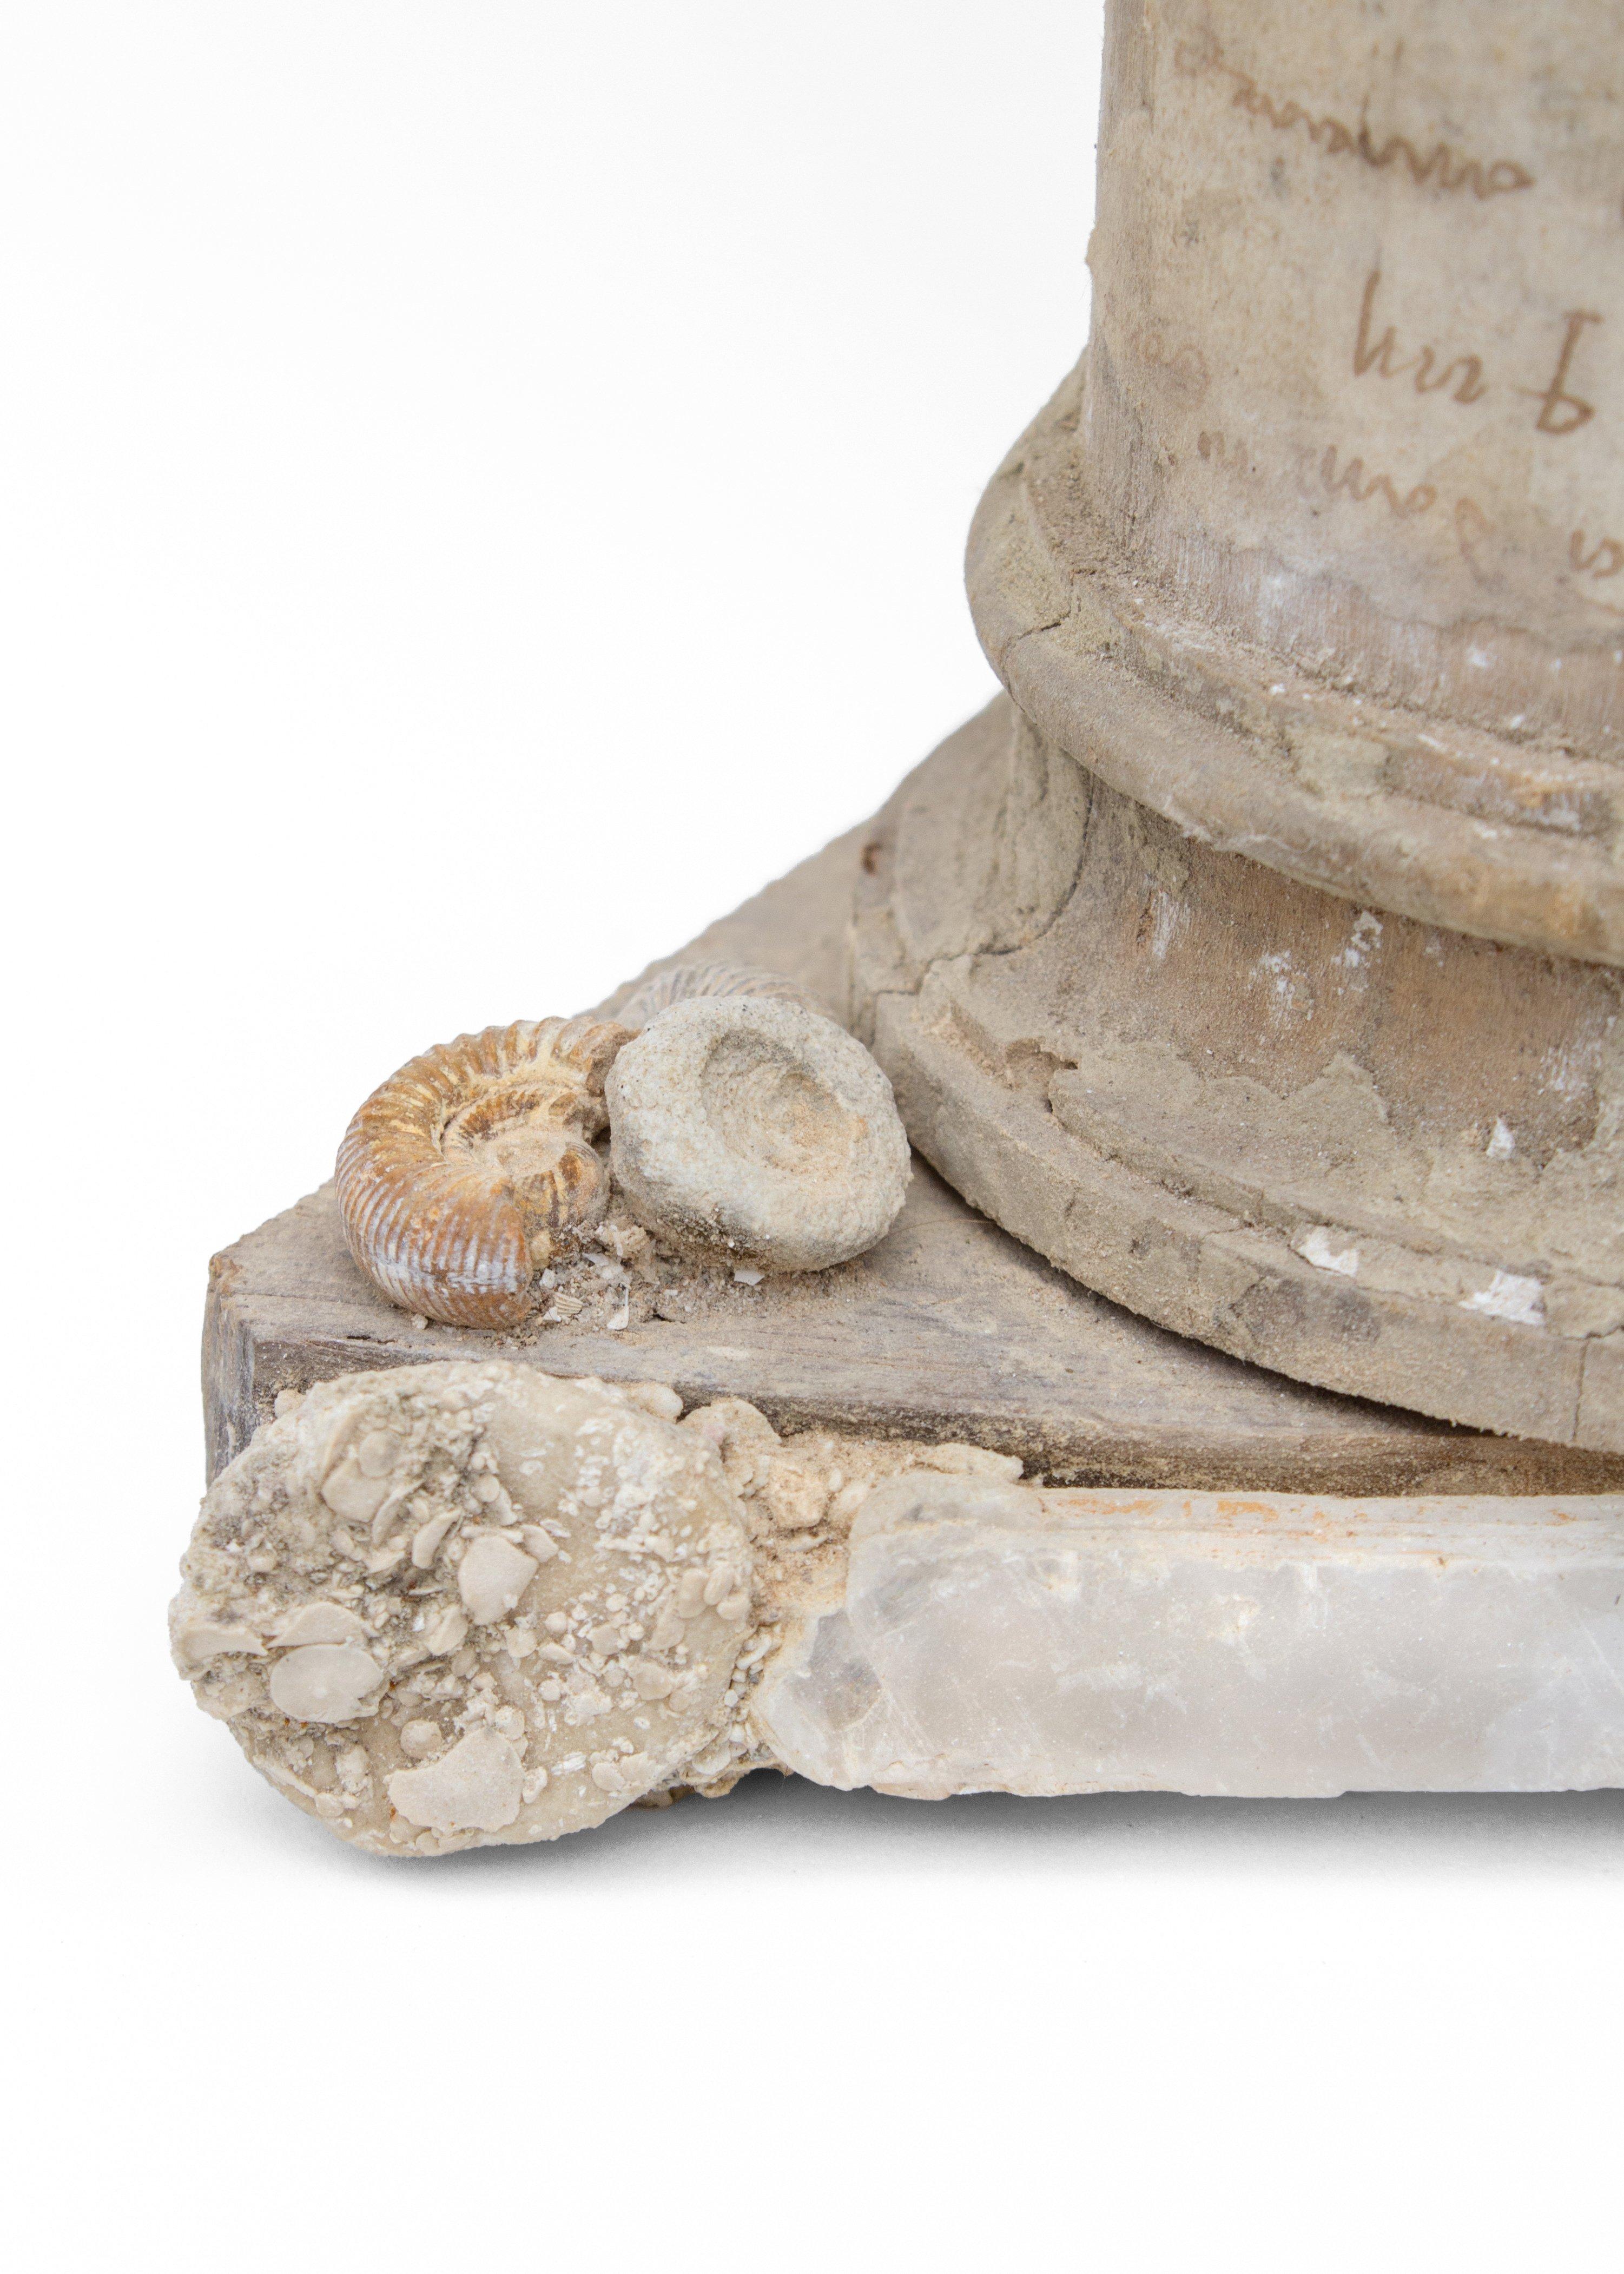 17th century Italian candlestick base decorated with a selenite blade, and various fossil shells, sea urchins, and ammonites. It has hand-written inscriptions on the base. This fragment is from a church in Florence. It was found and saved from the